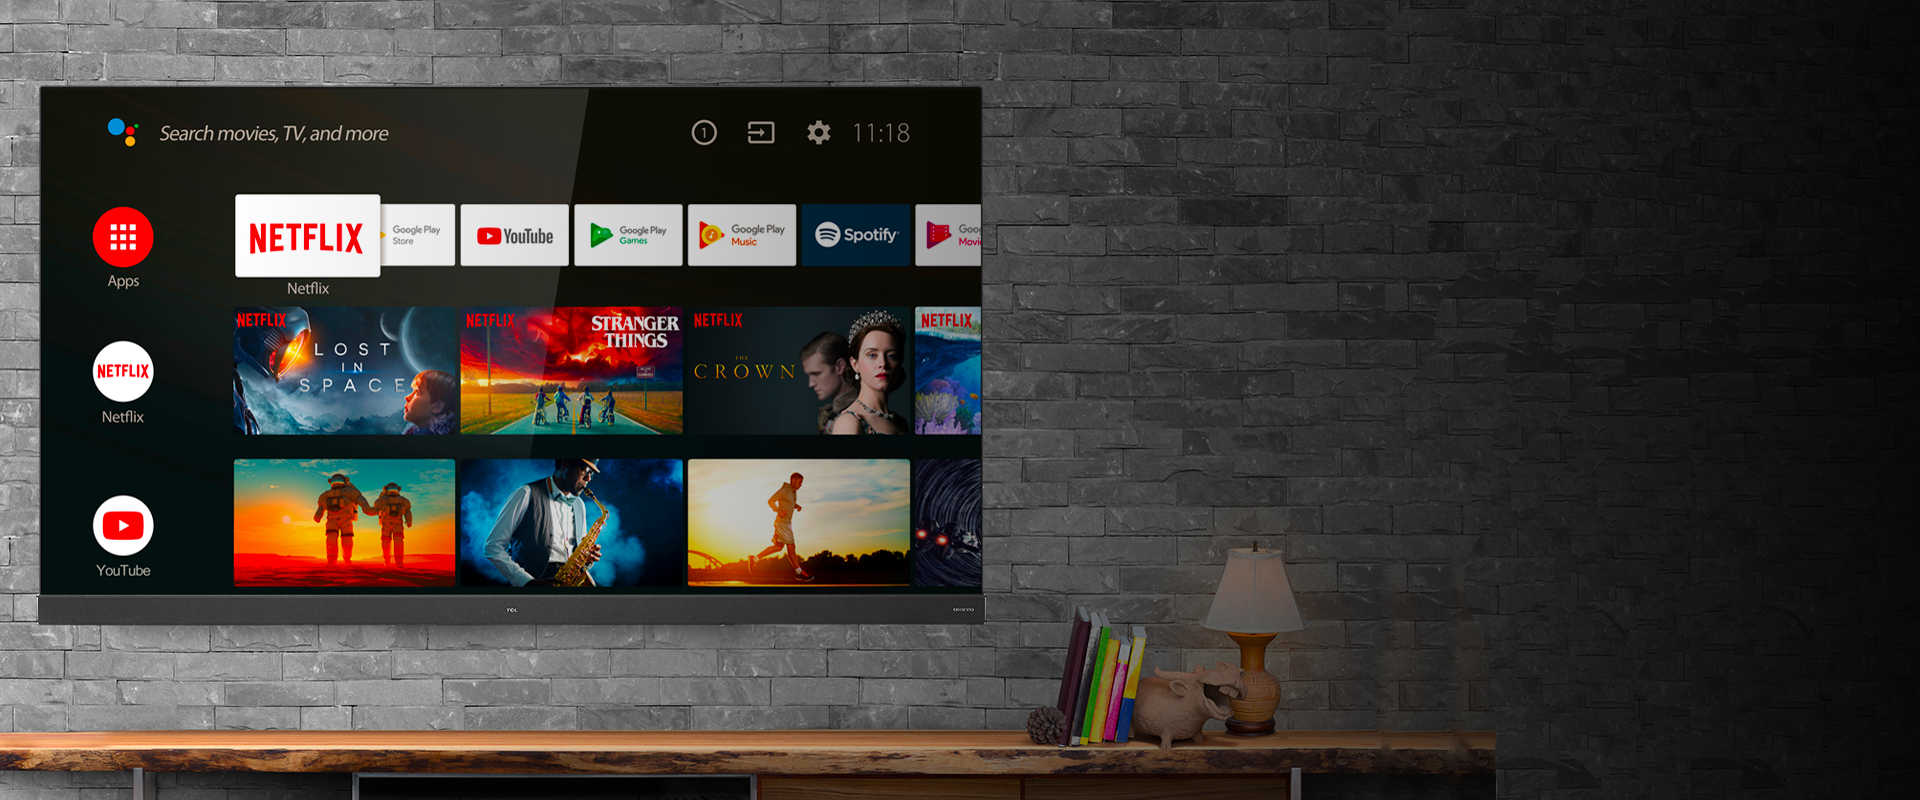 Android TV for easy and unlimited entertainment